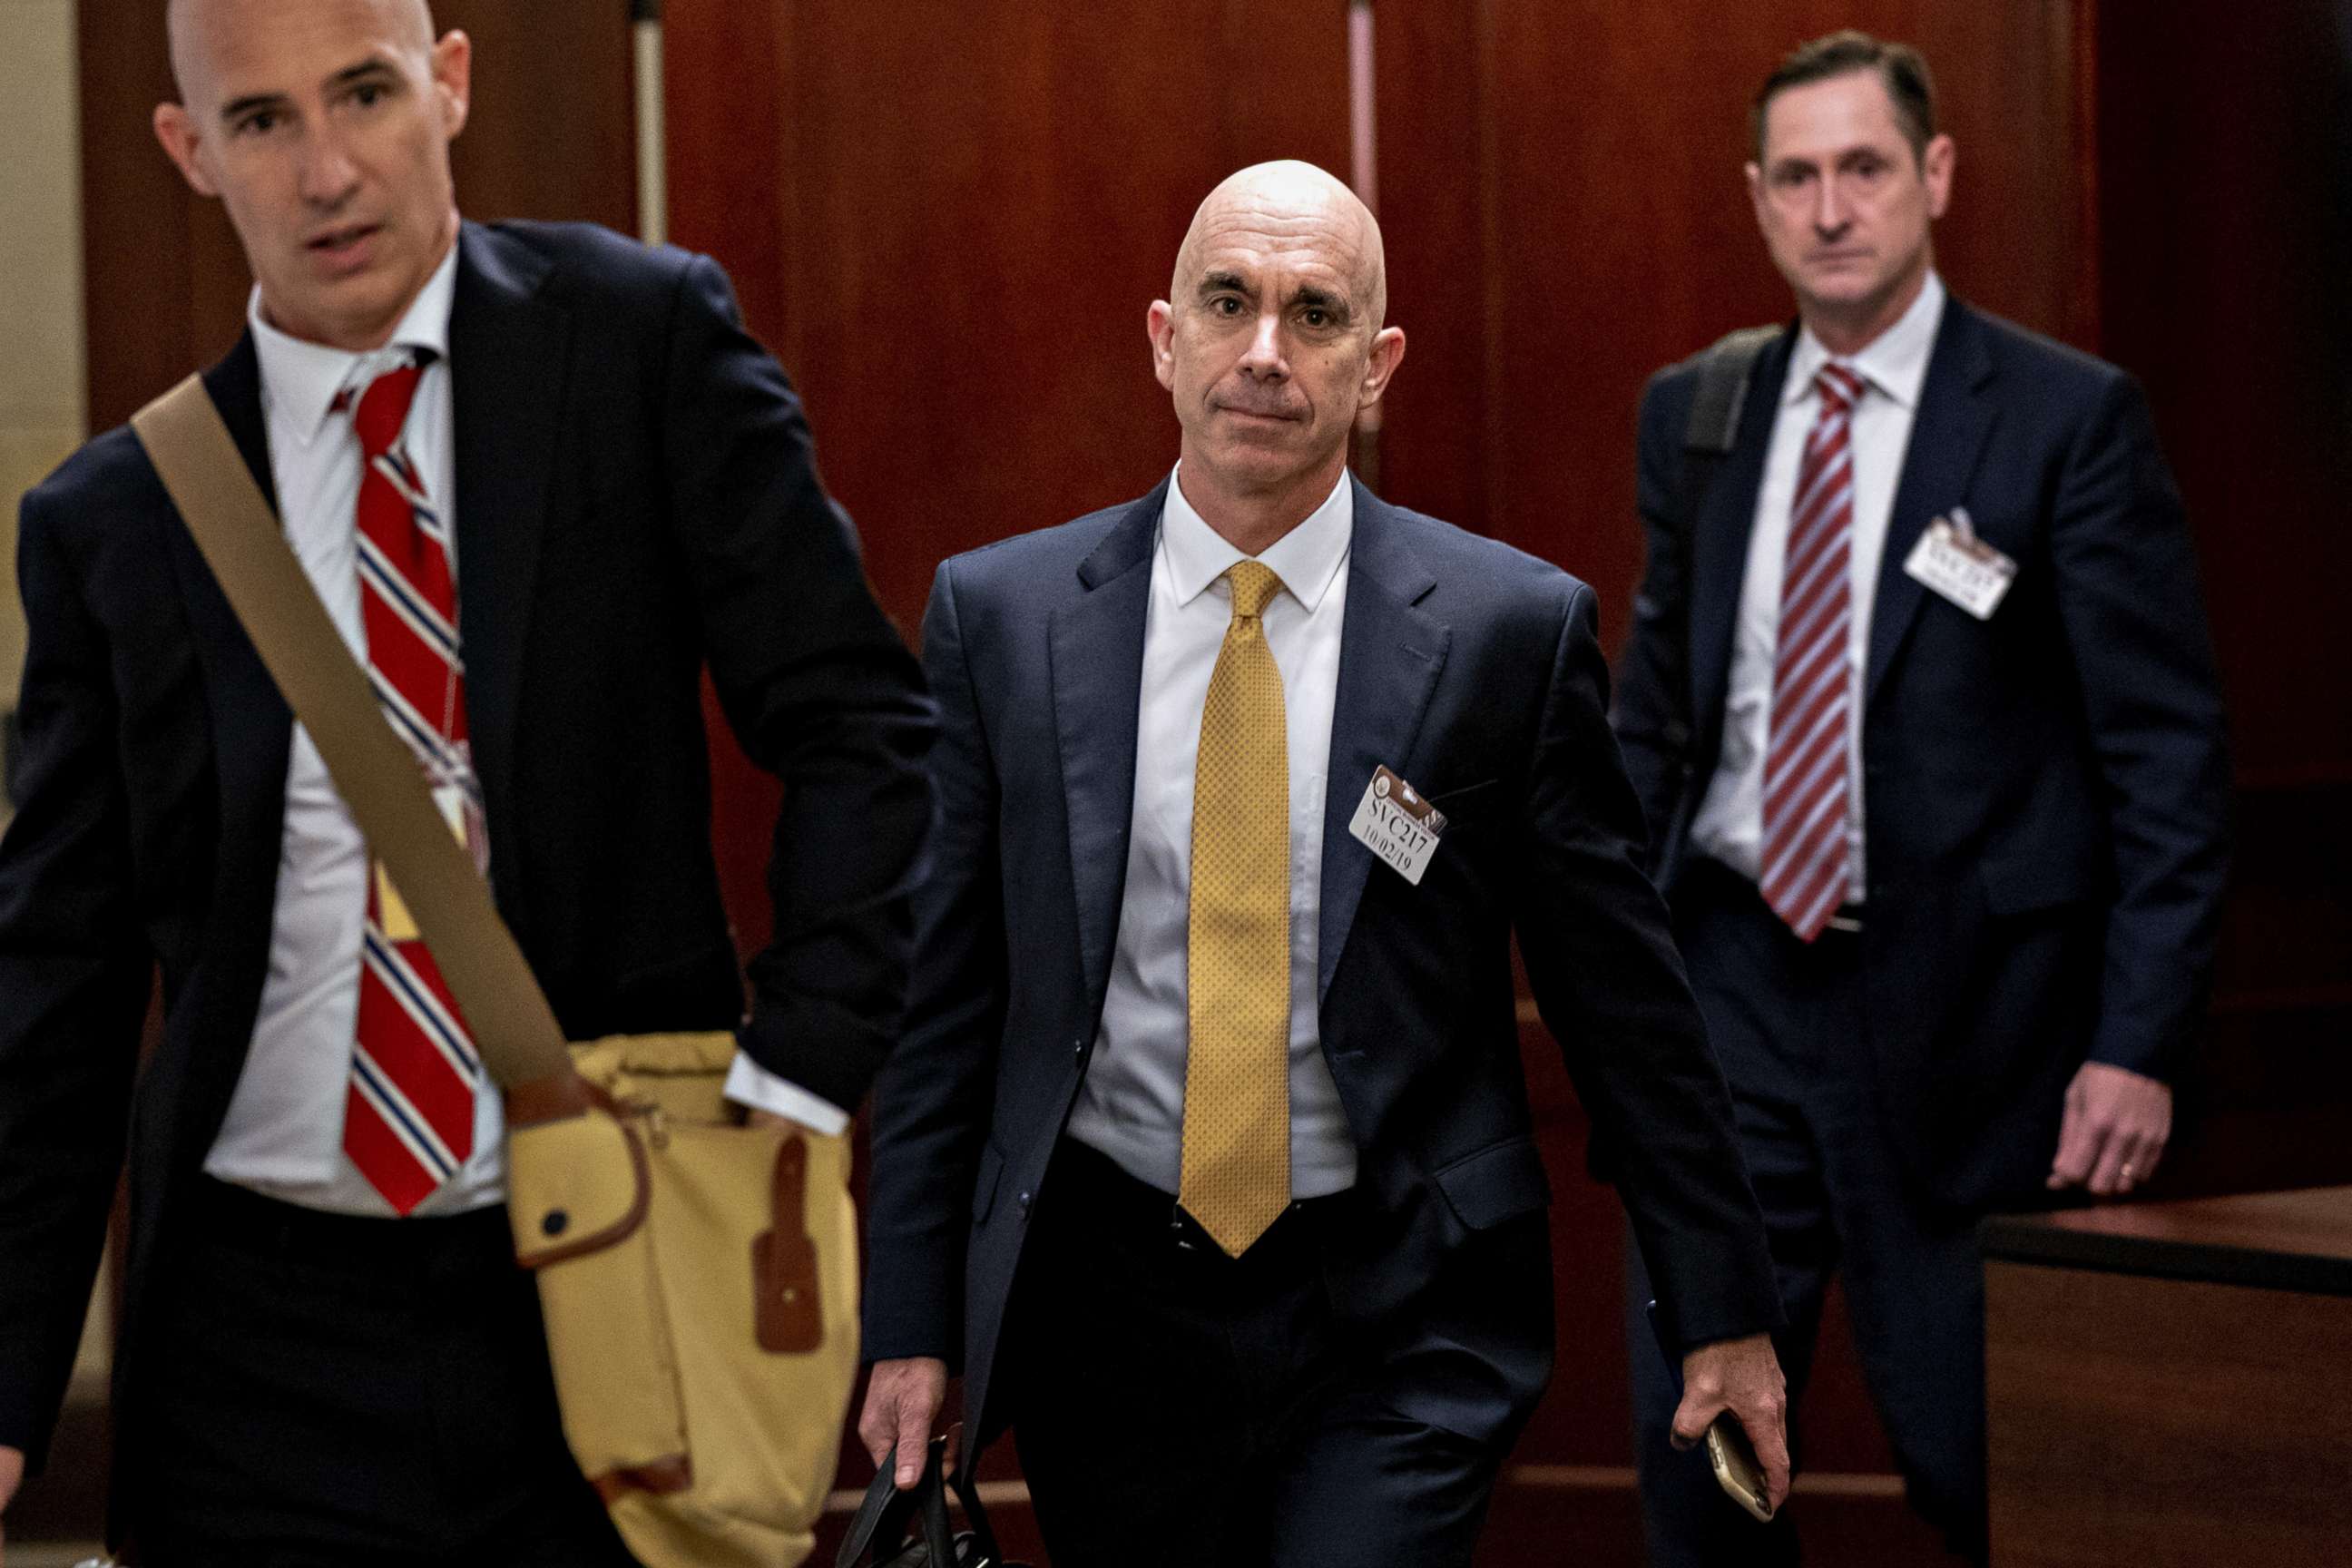 PHOTO: Steve Linick, State Department inspector general, center, exits after closed-door testimony on Capitol Hill in Washington, D.C., U.S., on Wednesday, Oct. 2, 2019.